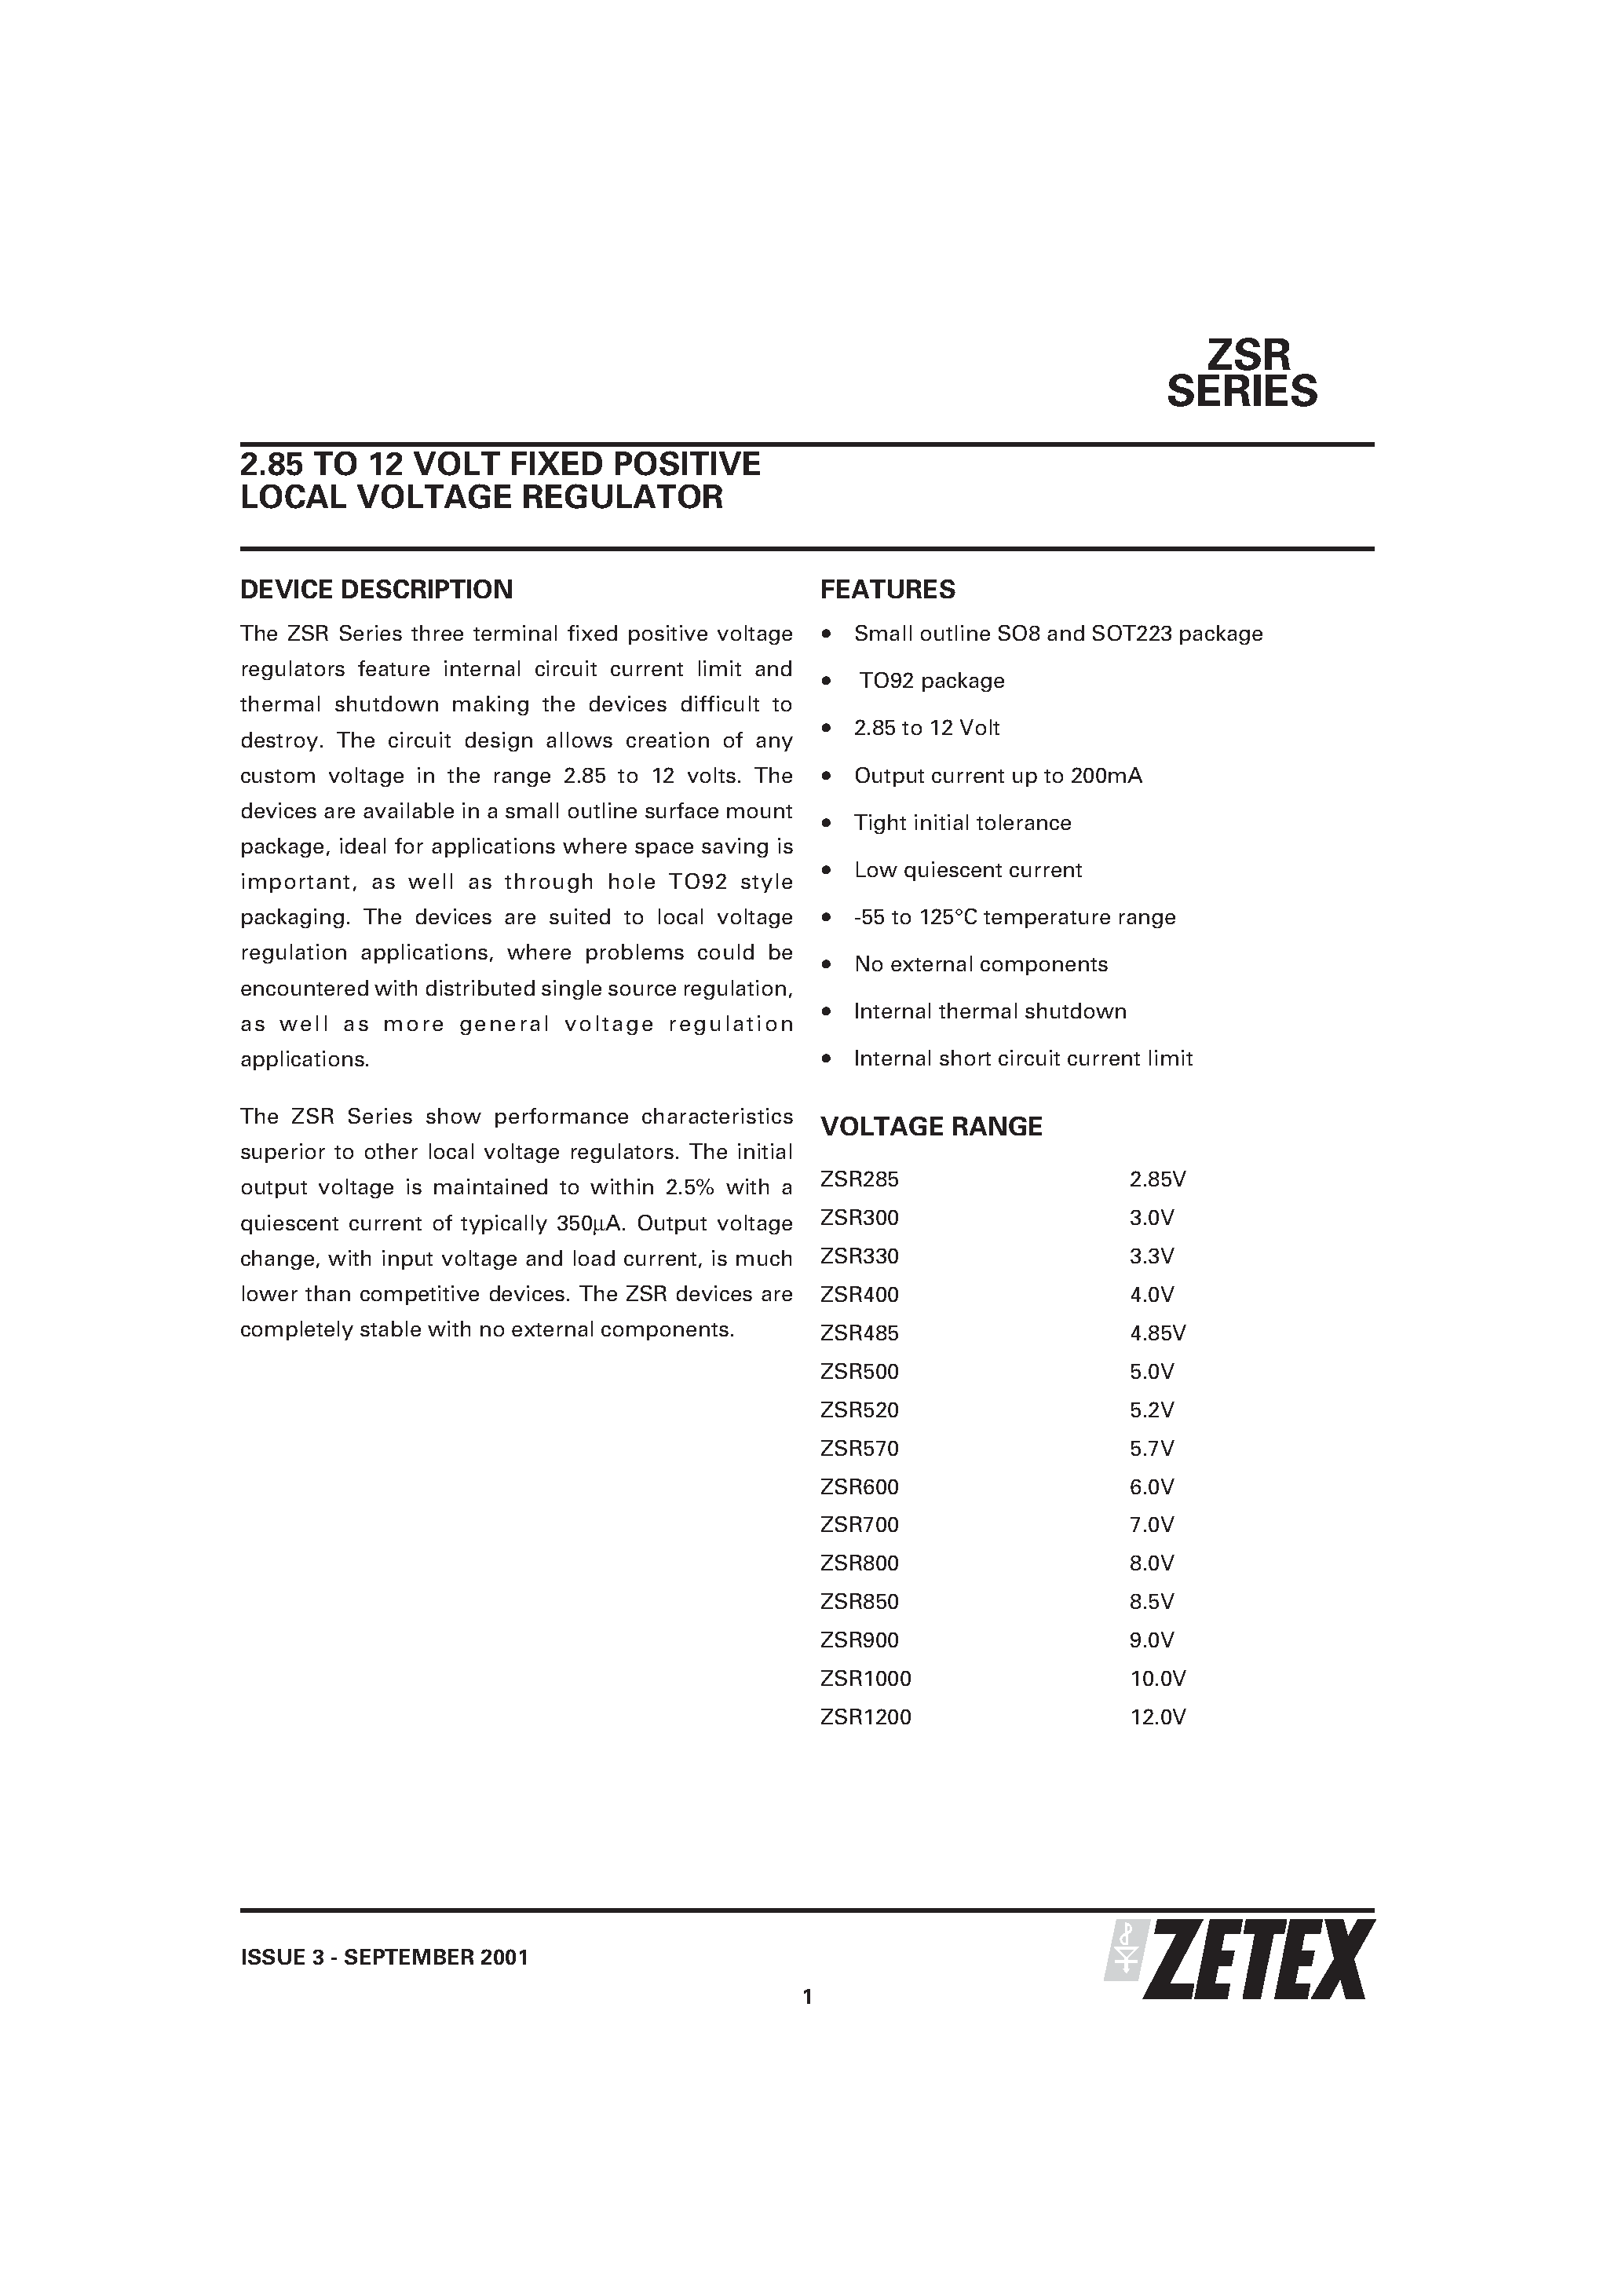 Datasheet ZSR570G - 2.85 TO 12 VOLT FIXED POSITIVE LOCAL VOLTAGE REGULATOR page 1